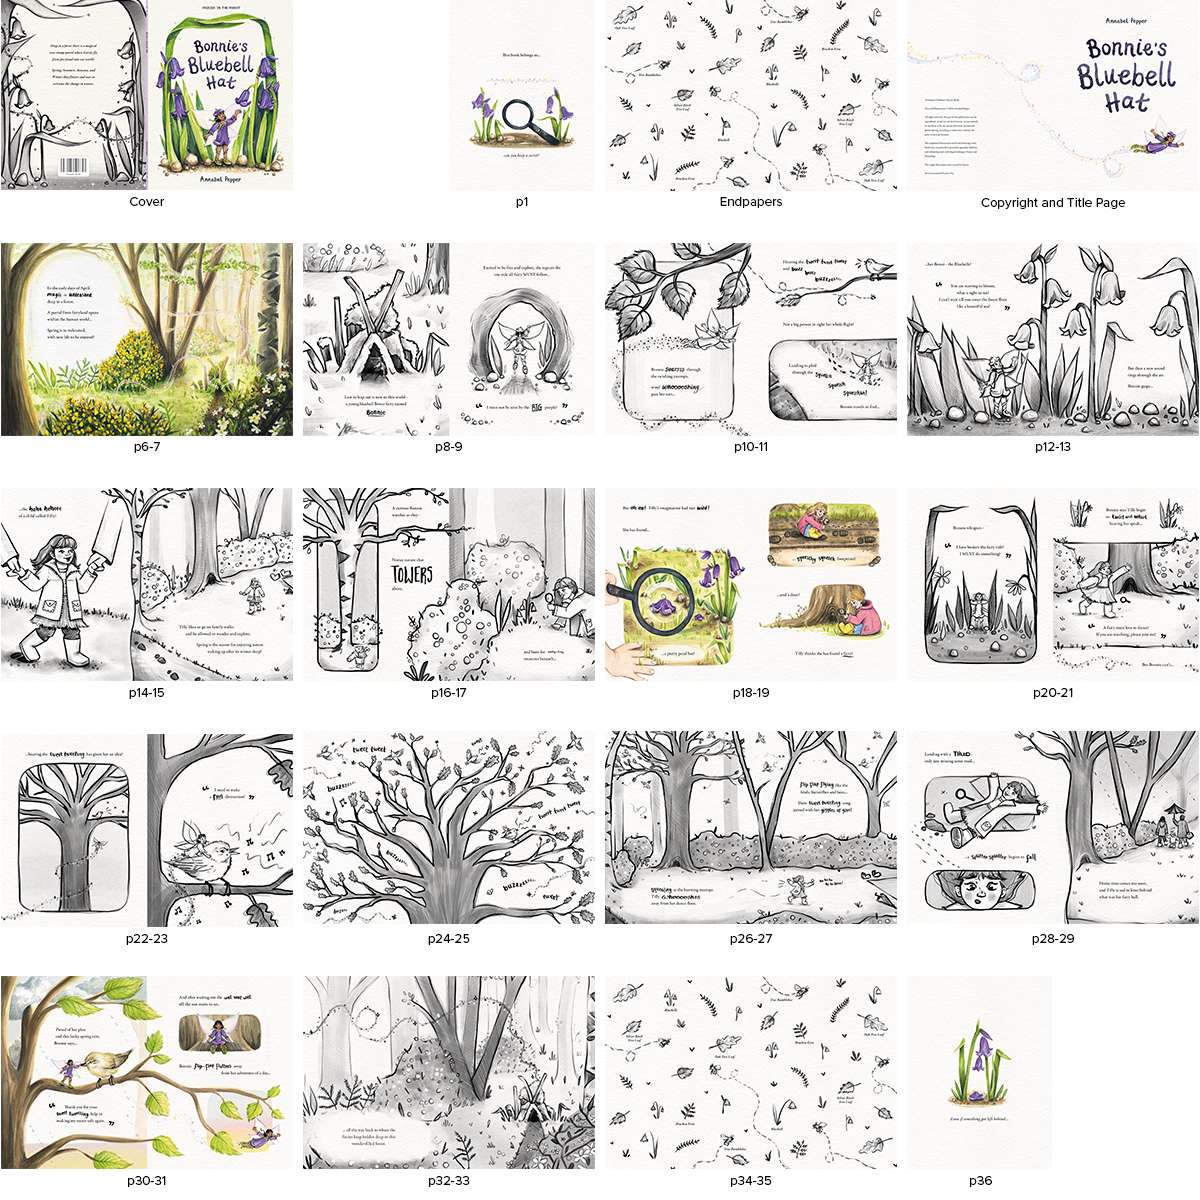 A storyboard showing the pages of the children's book 'Bonnie's Bluebell Hat'.